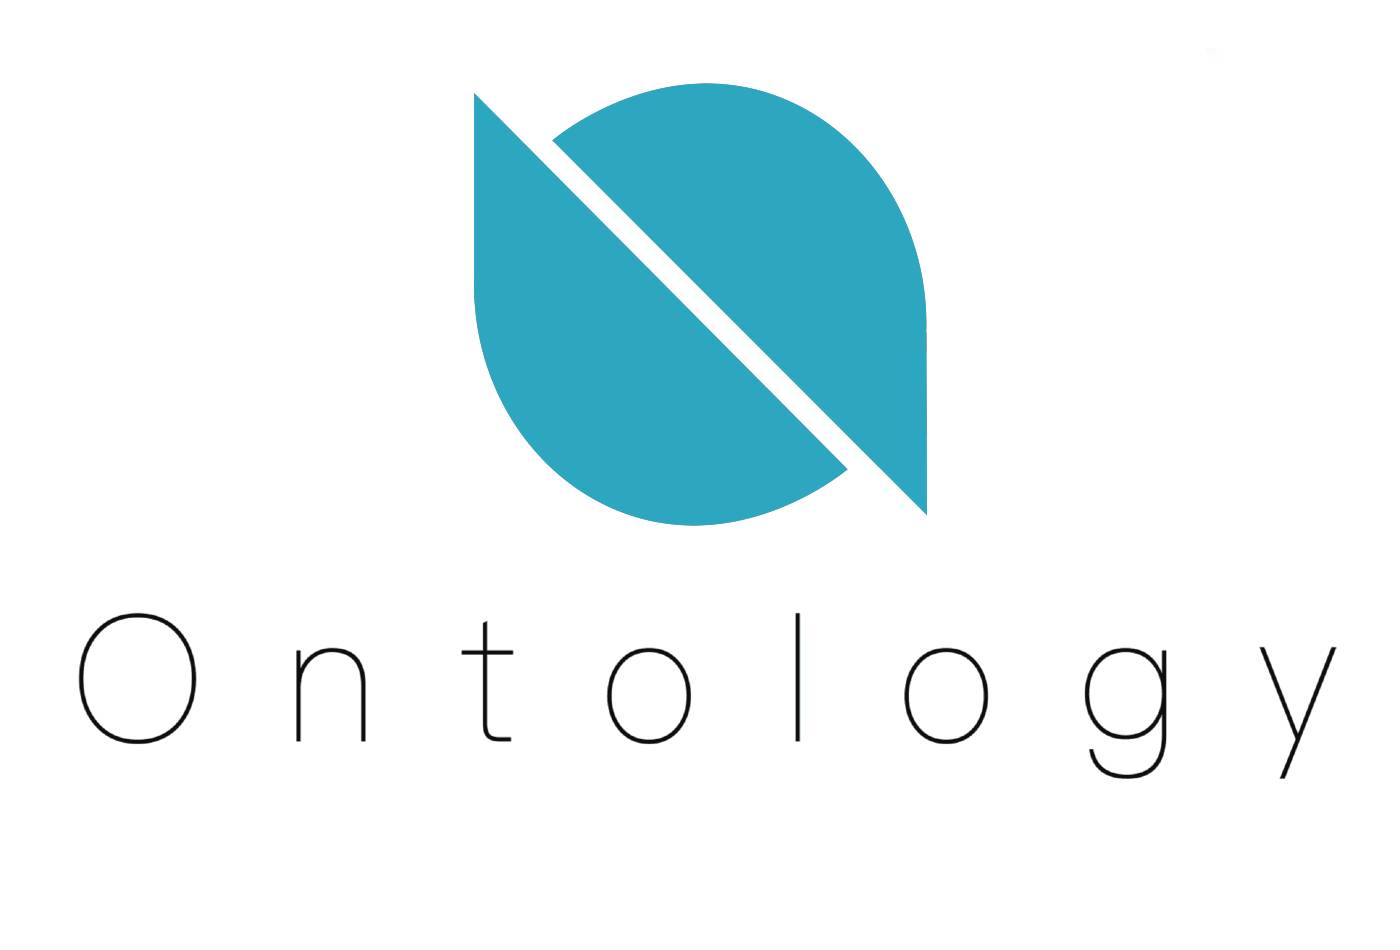 Ontology (ONT) Price Prediction 2022-2030: The Most Realistic Analysis